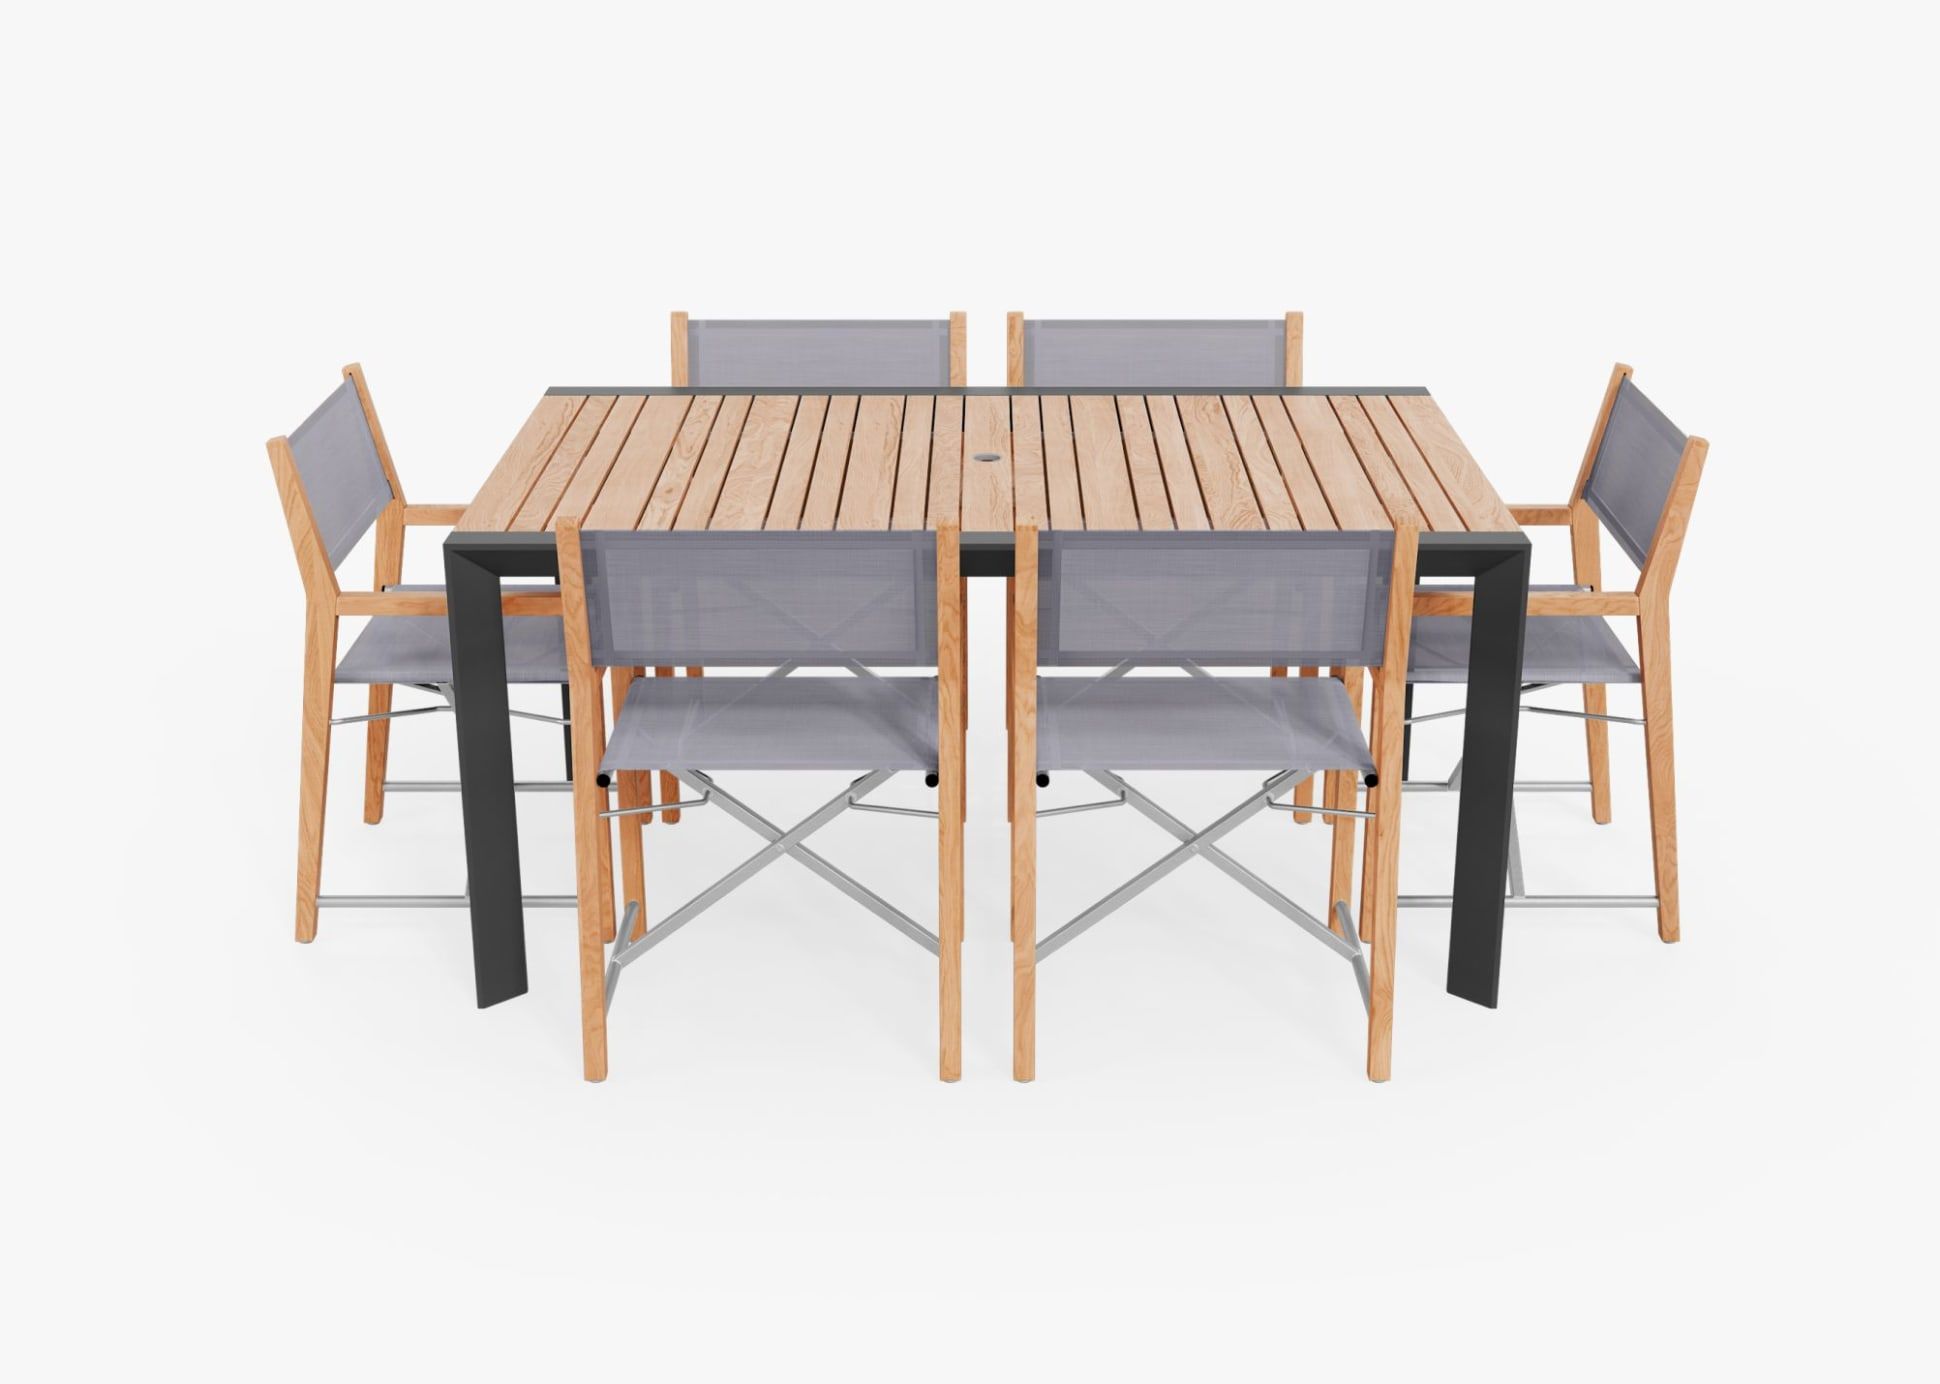 8 Best Patio Dining Sets to Buy in 2022 - Outdoor Patio Dining Sets